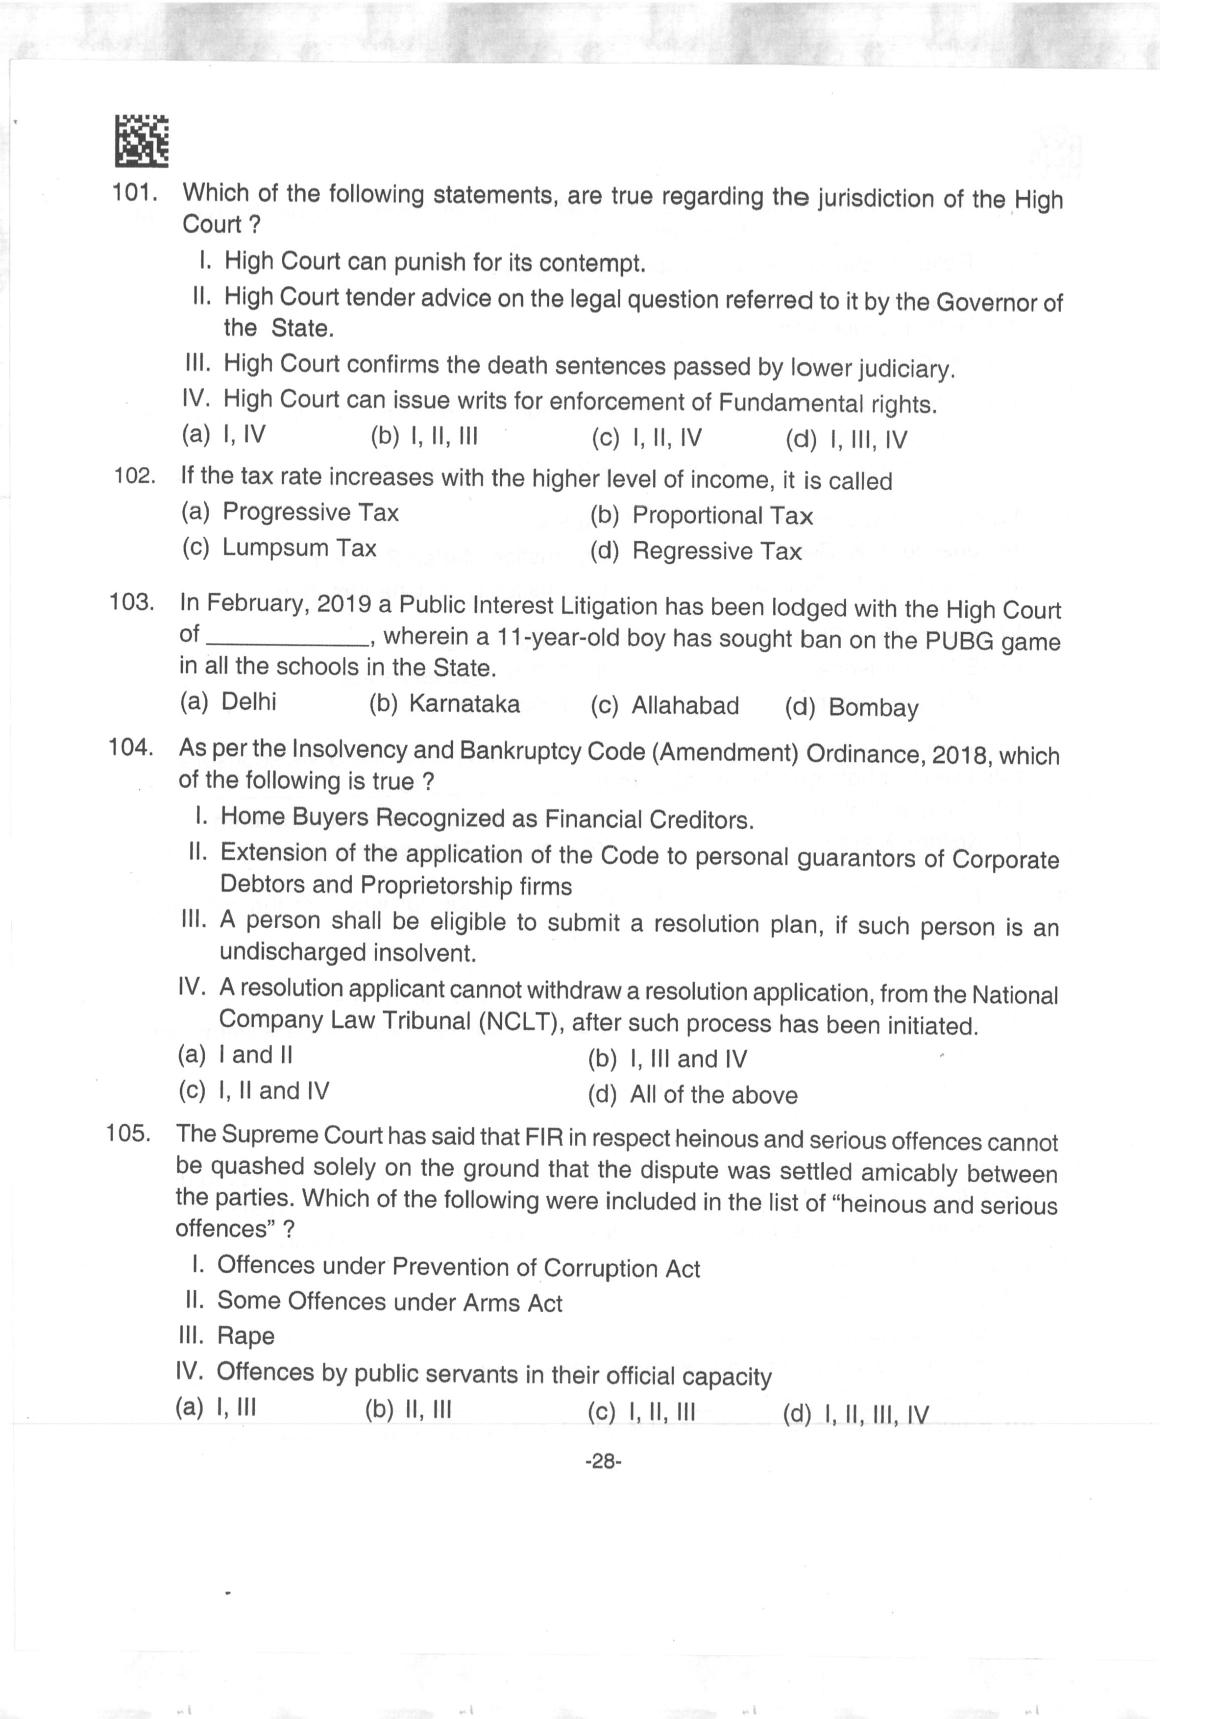 AILET 2019 Question Paper for BA LLB - Page 28